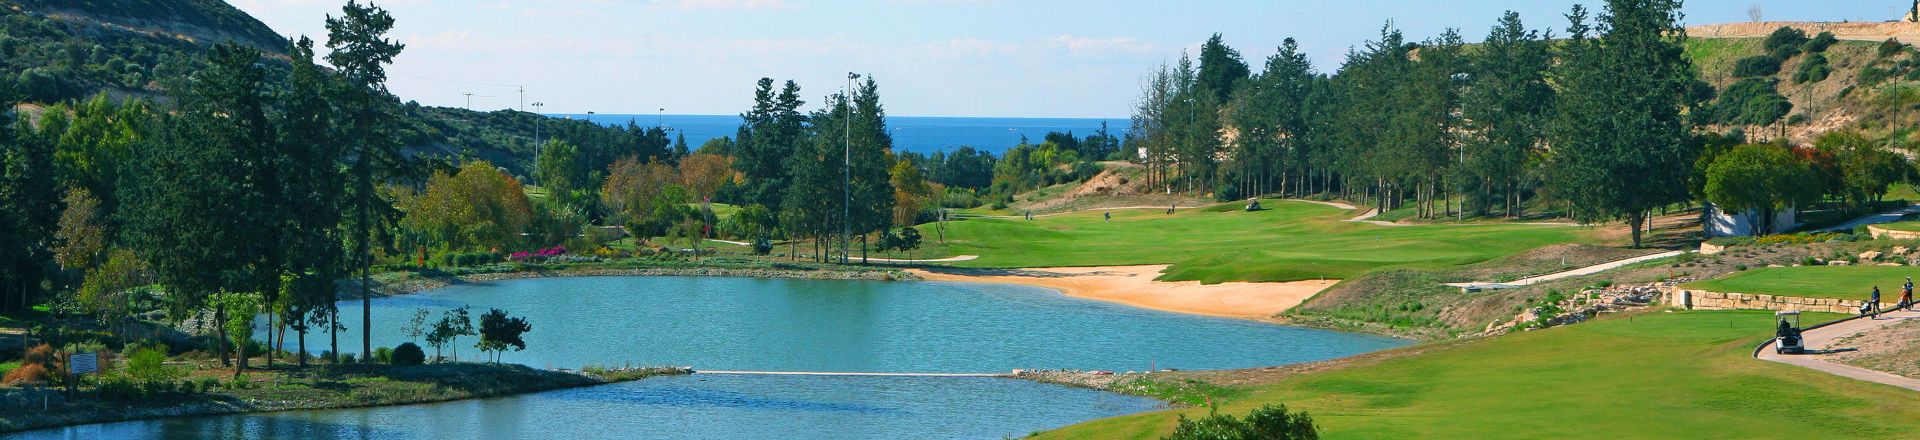 Discover the beauty and challenge of Secret Valley Golf Course in Cyprus – A picturesque golf destination surrounded by nature's splendor.